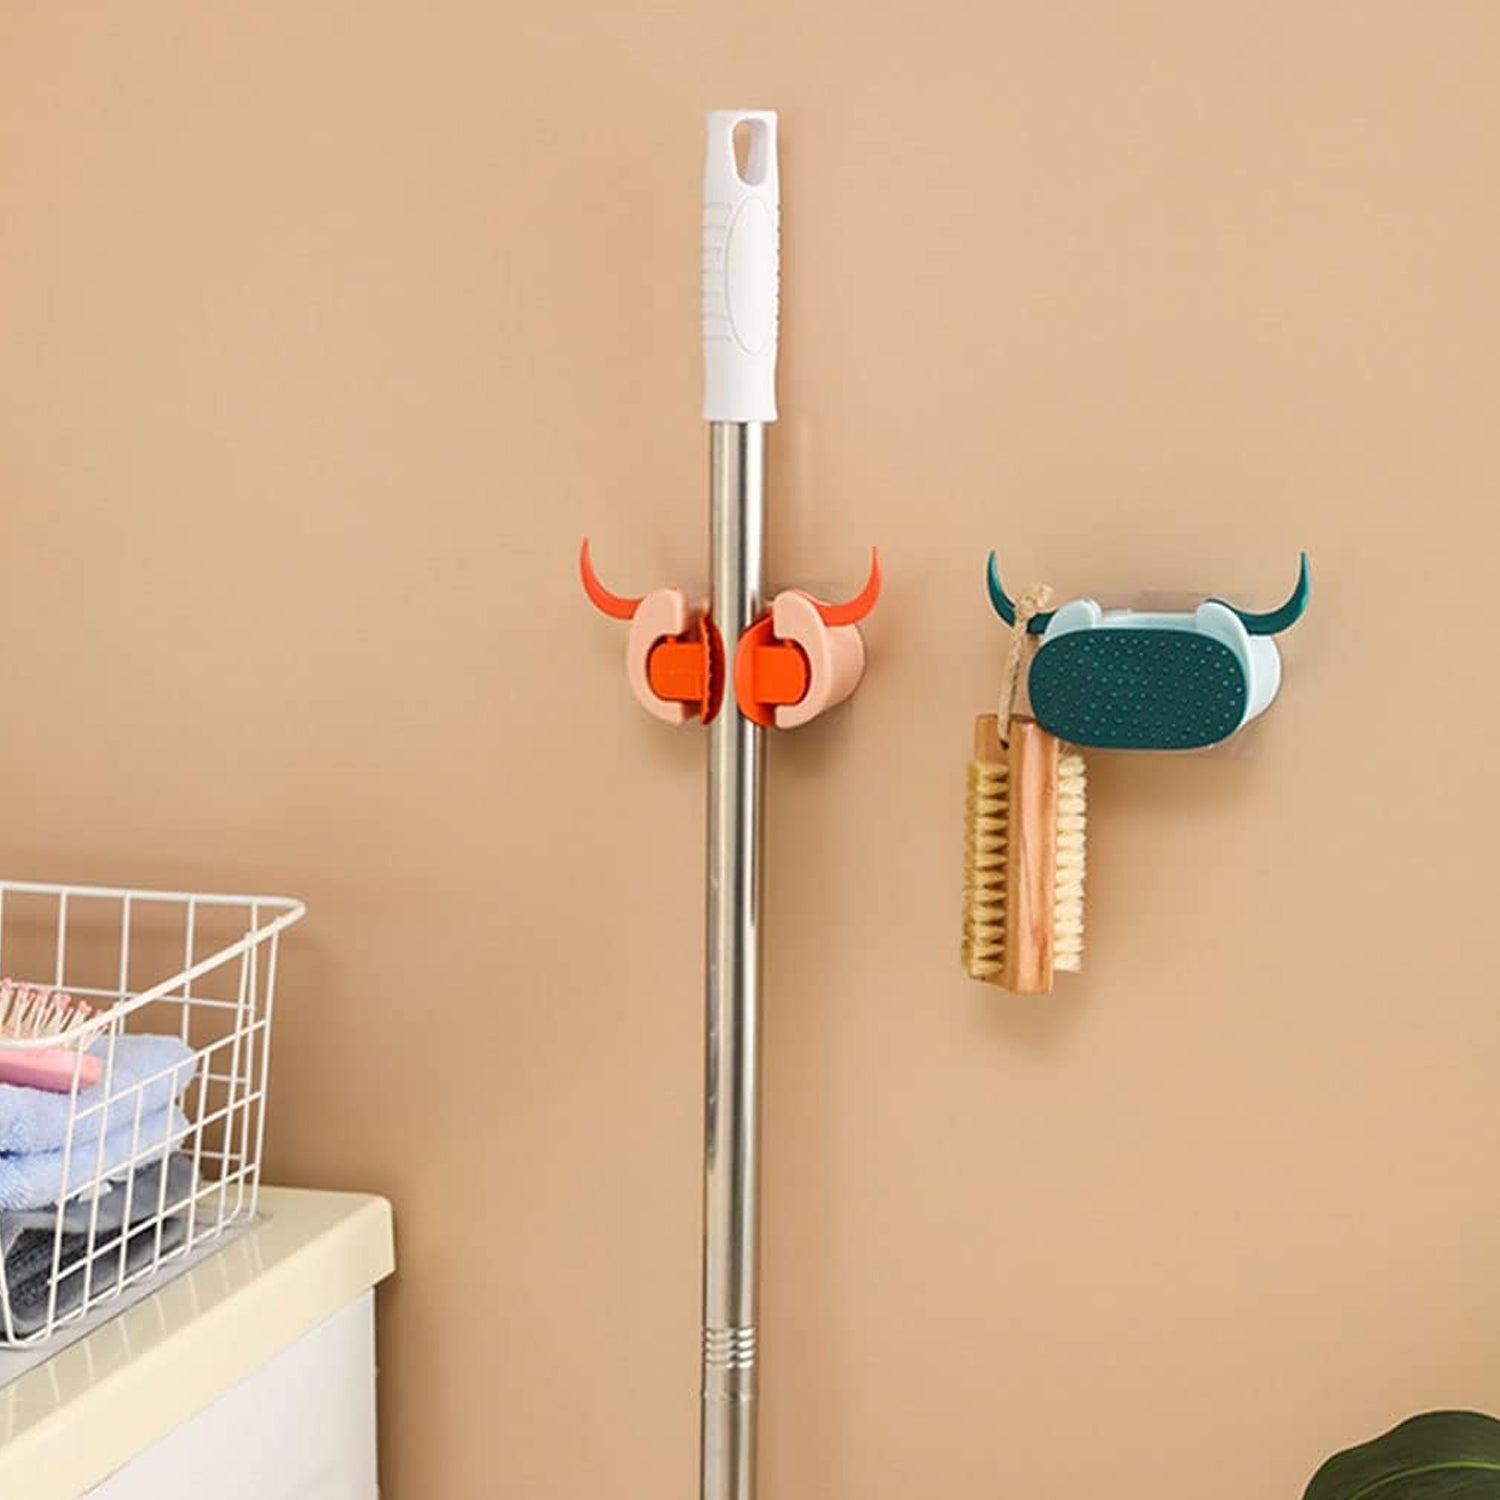 4318 Multifunctional Cartoon Sticky Punch Free Mop Holder Wall Mounted Broom Organizer Cleaning Tools Holder Hanger, Self Adhesive Cute Cow Head Suction Cup Hanging Hook for Bathroom Kitchen (1 Pc)